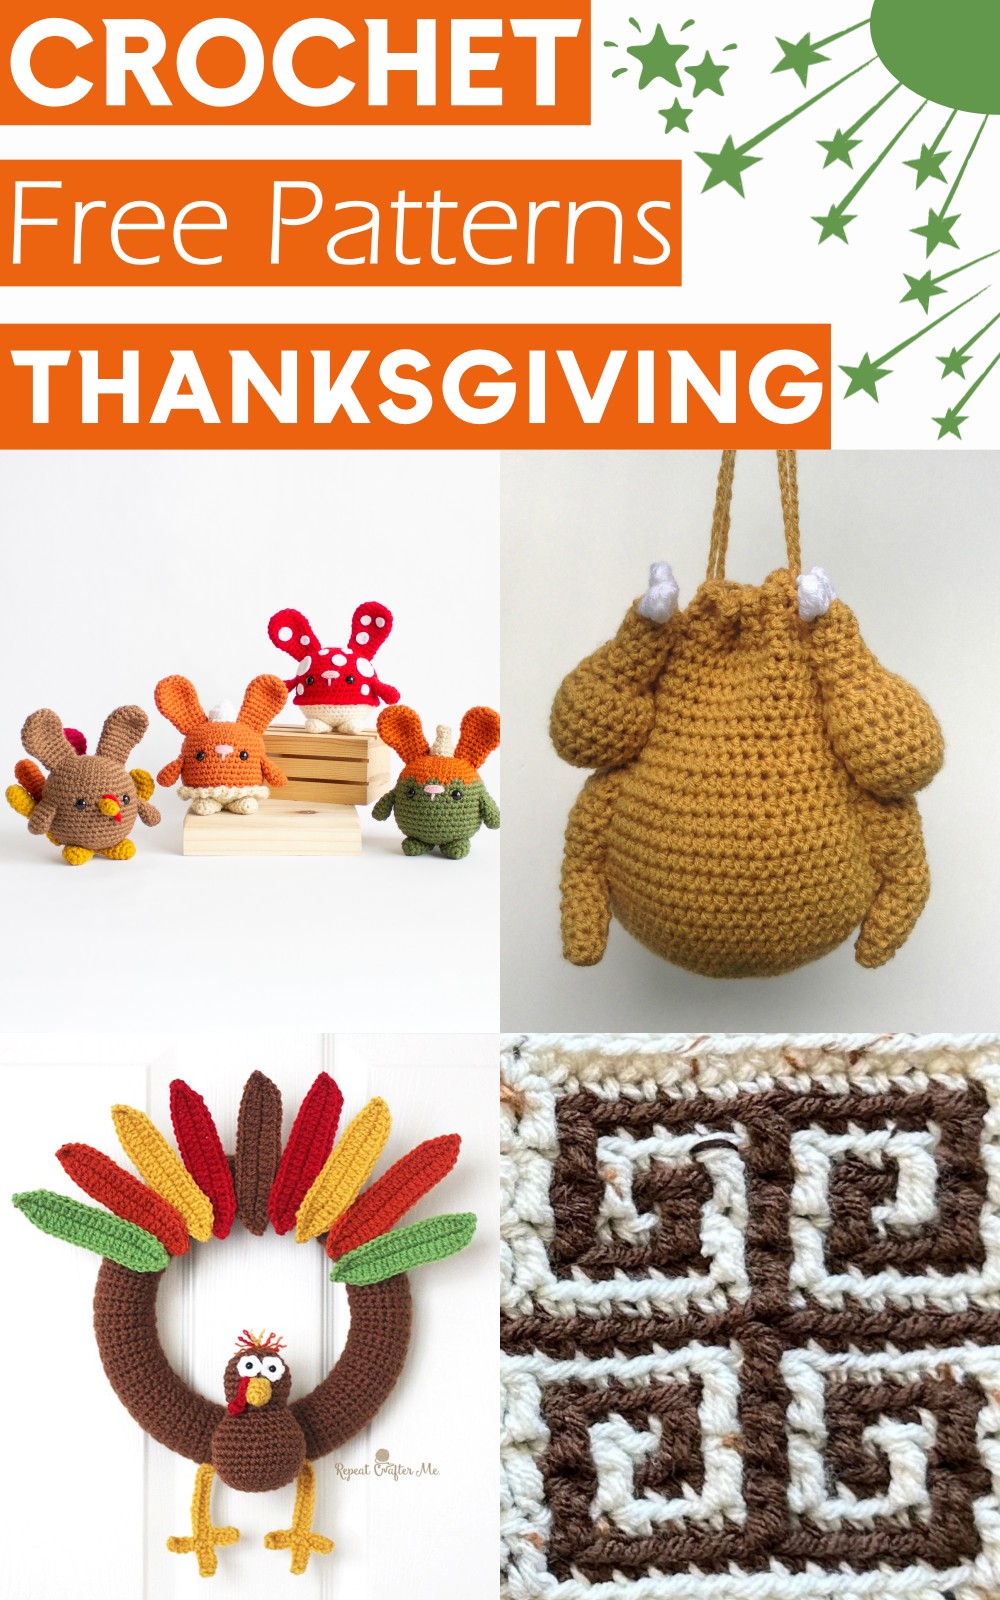  Crochet Thanksgiving Patterns For Toys, Decor & Food